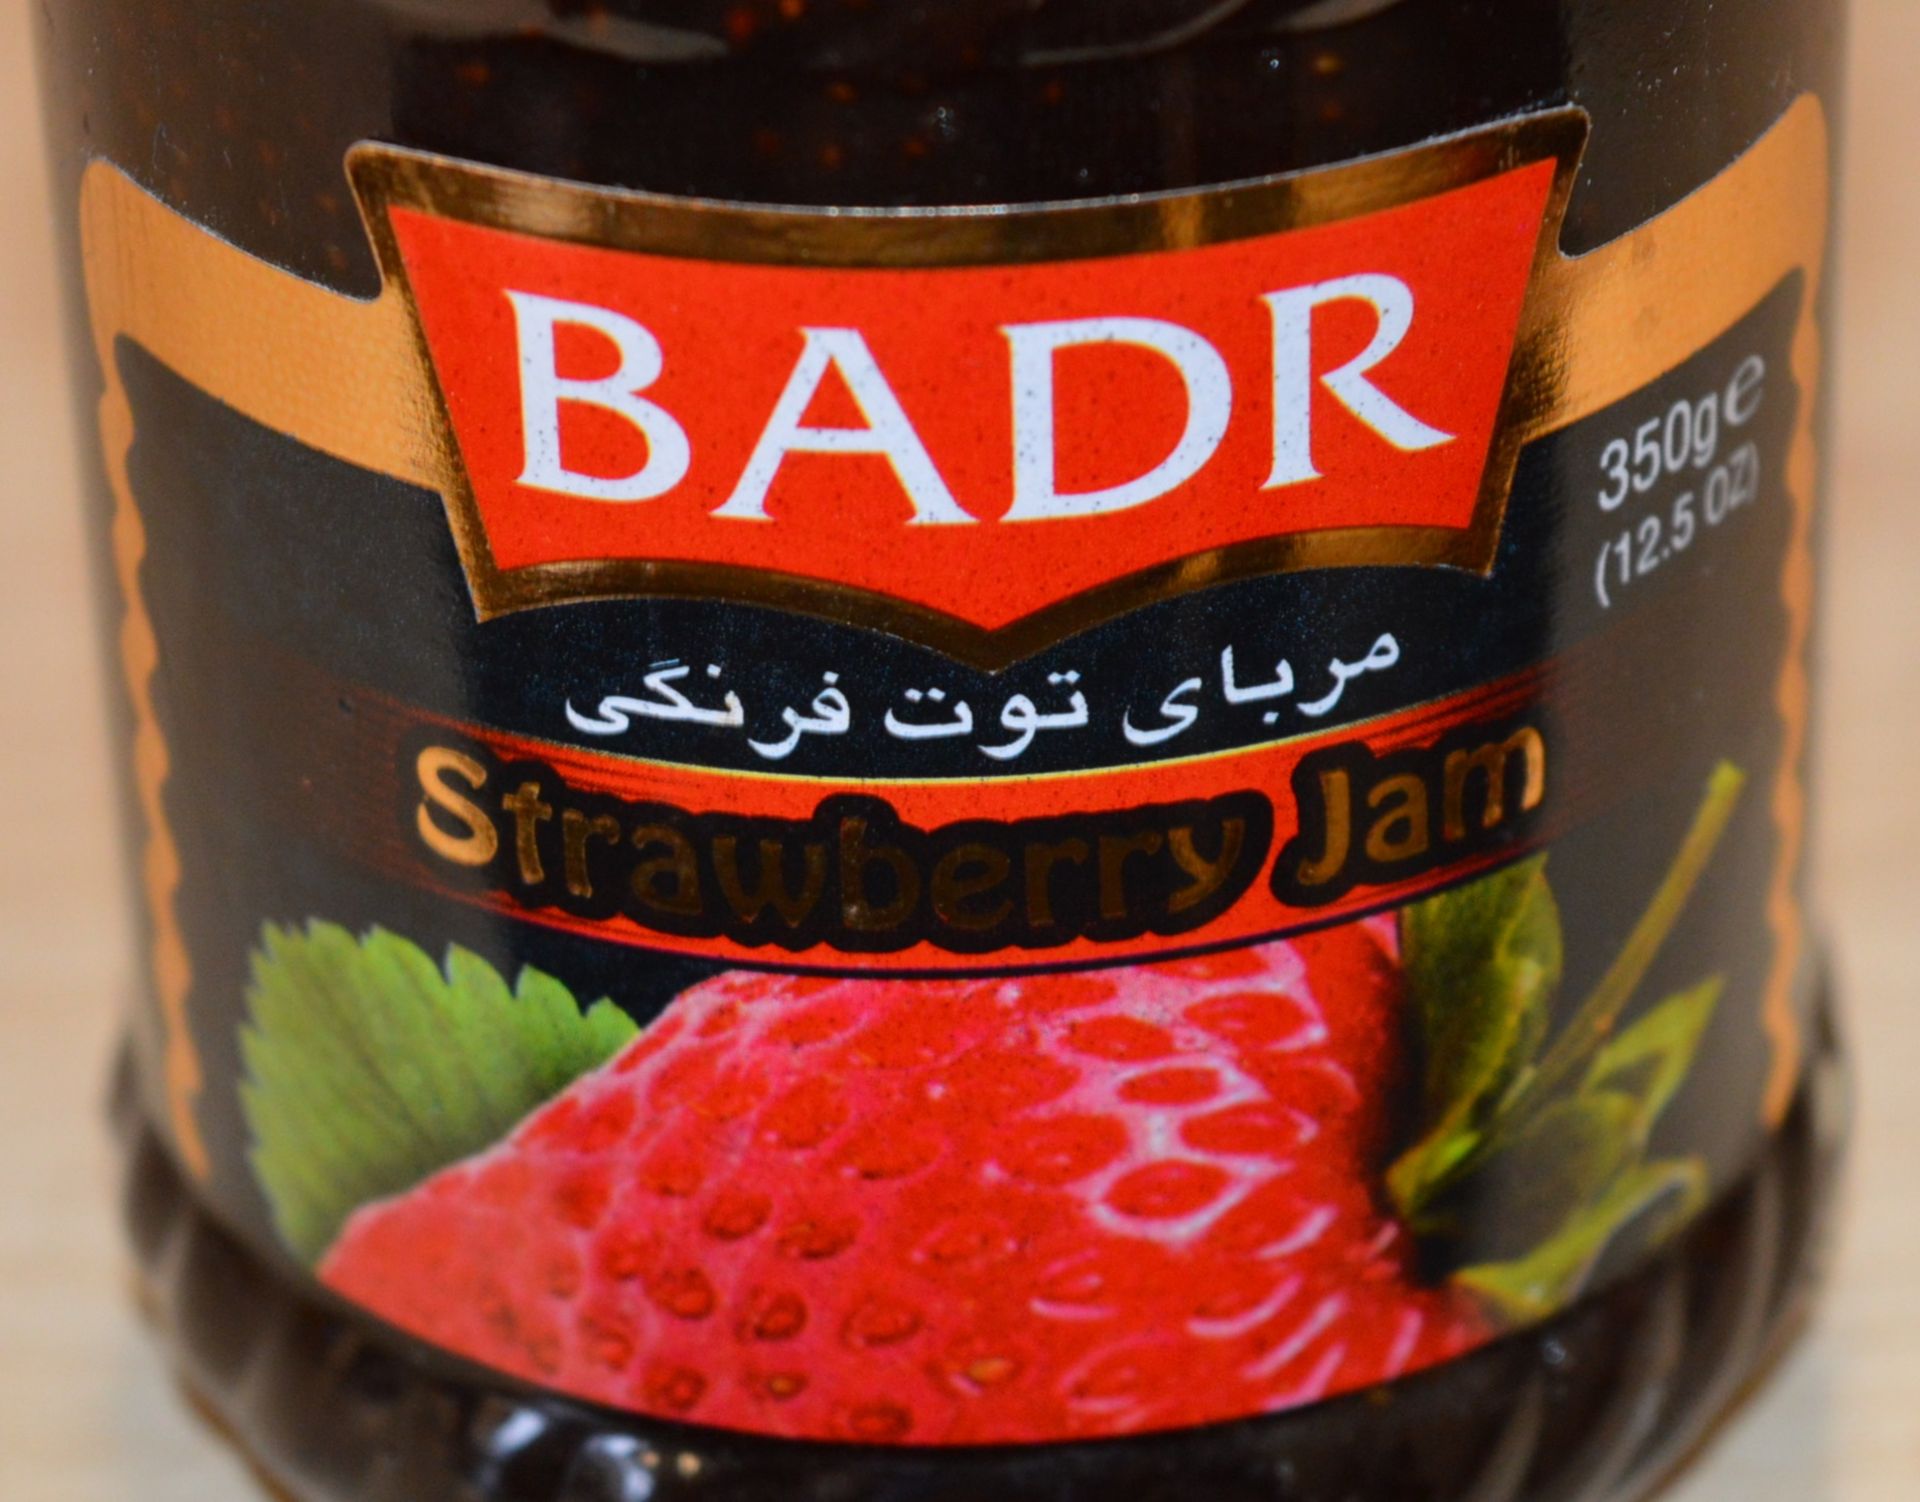 240 x Jars Badr Strawberry Jam - Expiry Date 01/11/2016 - Brand New Stock - Includes 20 x Cases of - Image 2 of 3